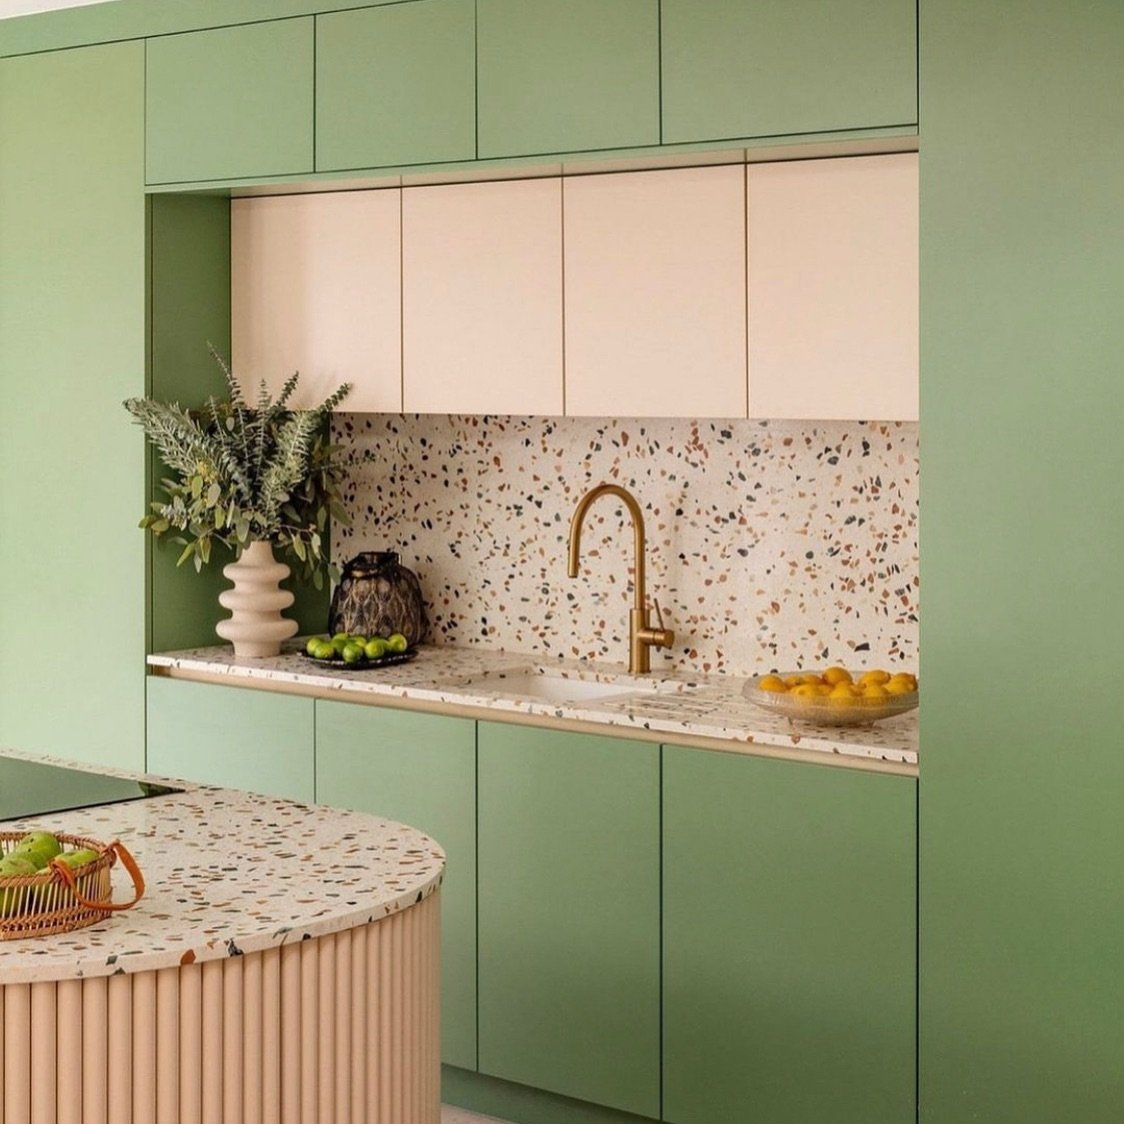 @sheratoninteriors and @studio_jayga_architects have outdone themselves with this award winning kitchen. 

Calming green and cream palette, playful Terrazzo countertops, and elegant gold fixtures - the perfect blend of classic and contemporary style.